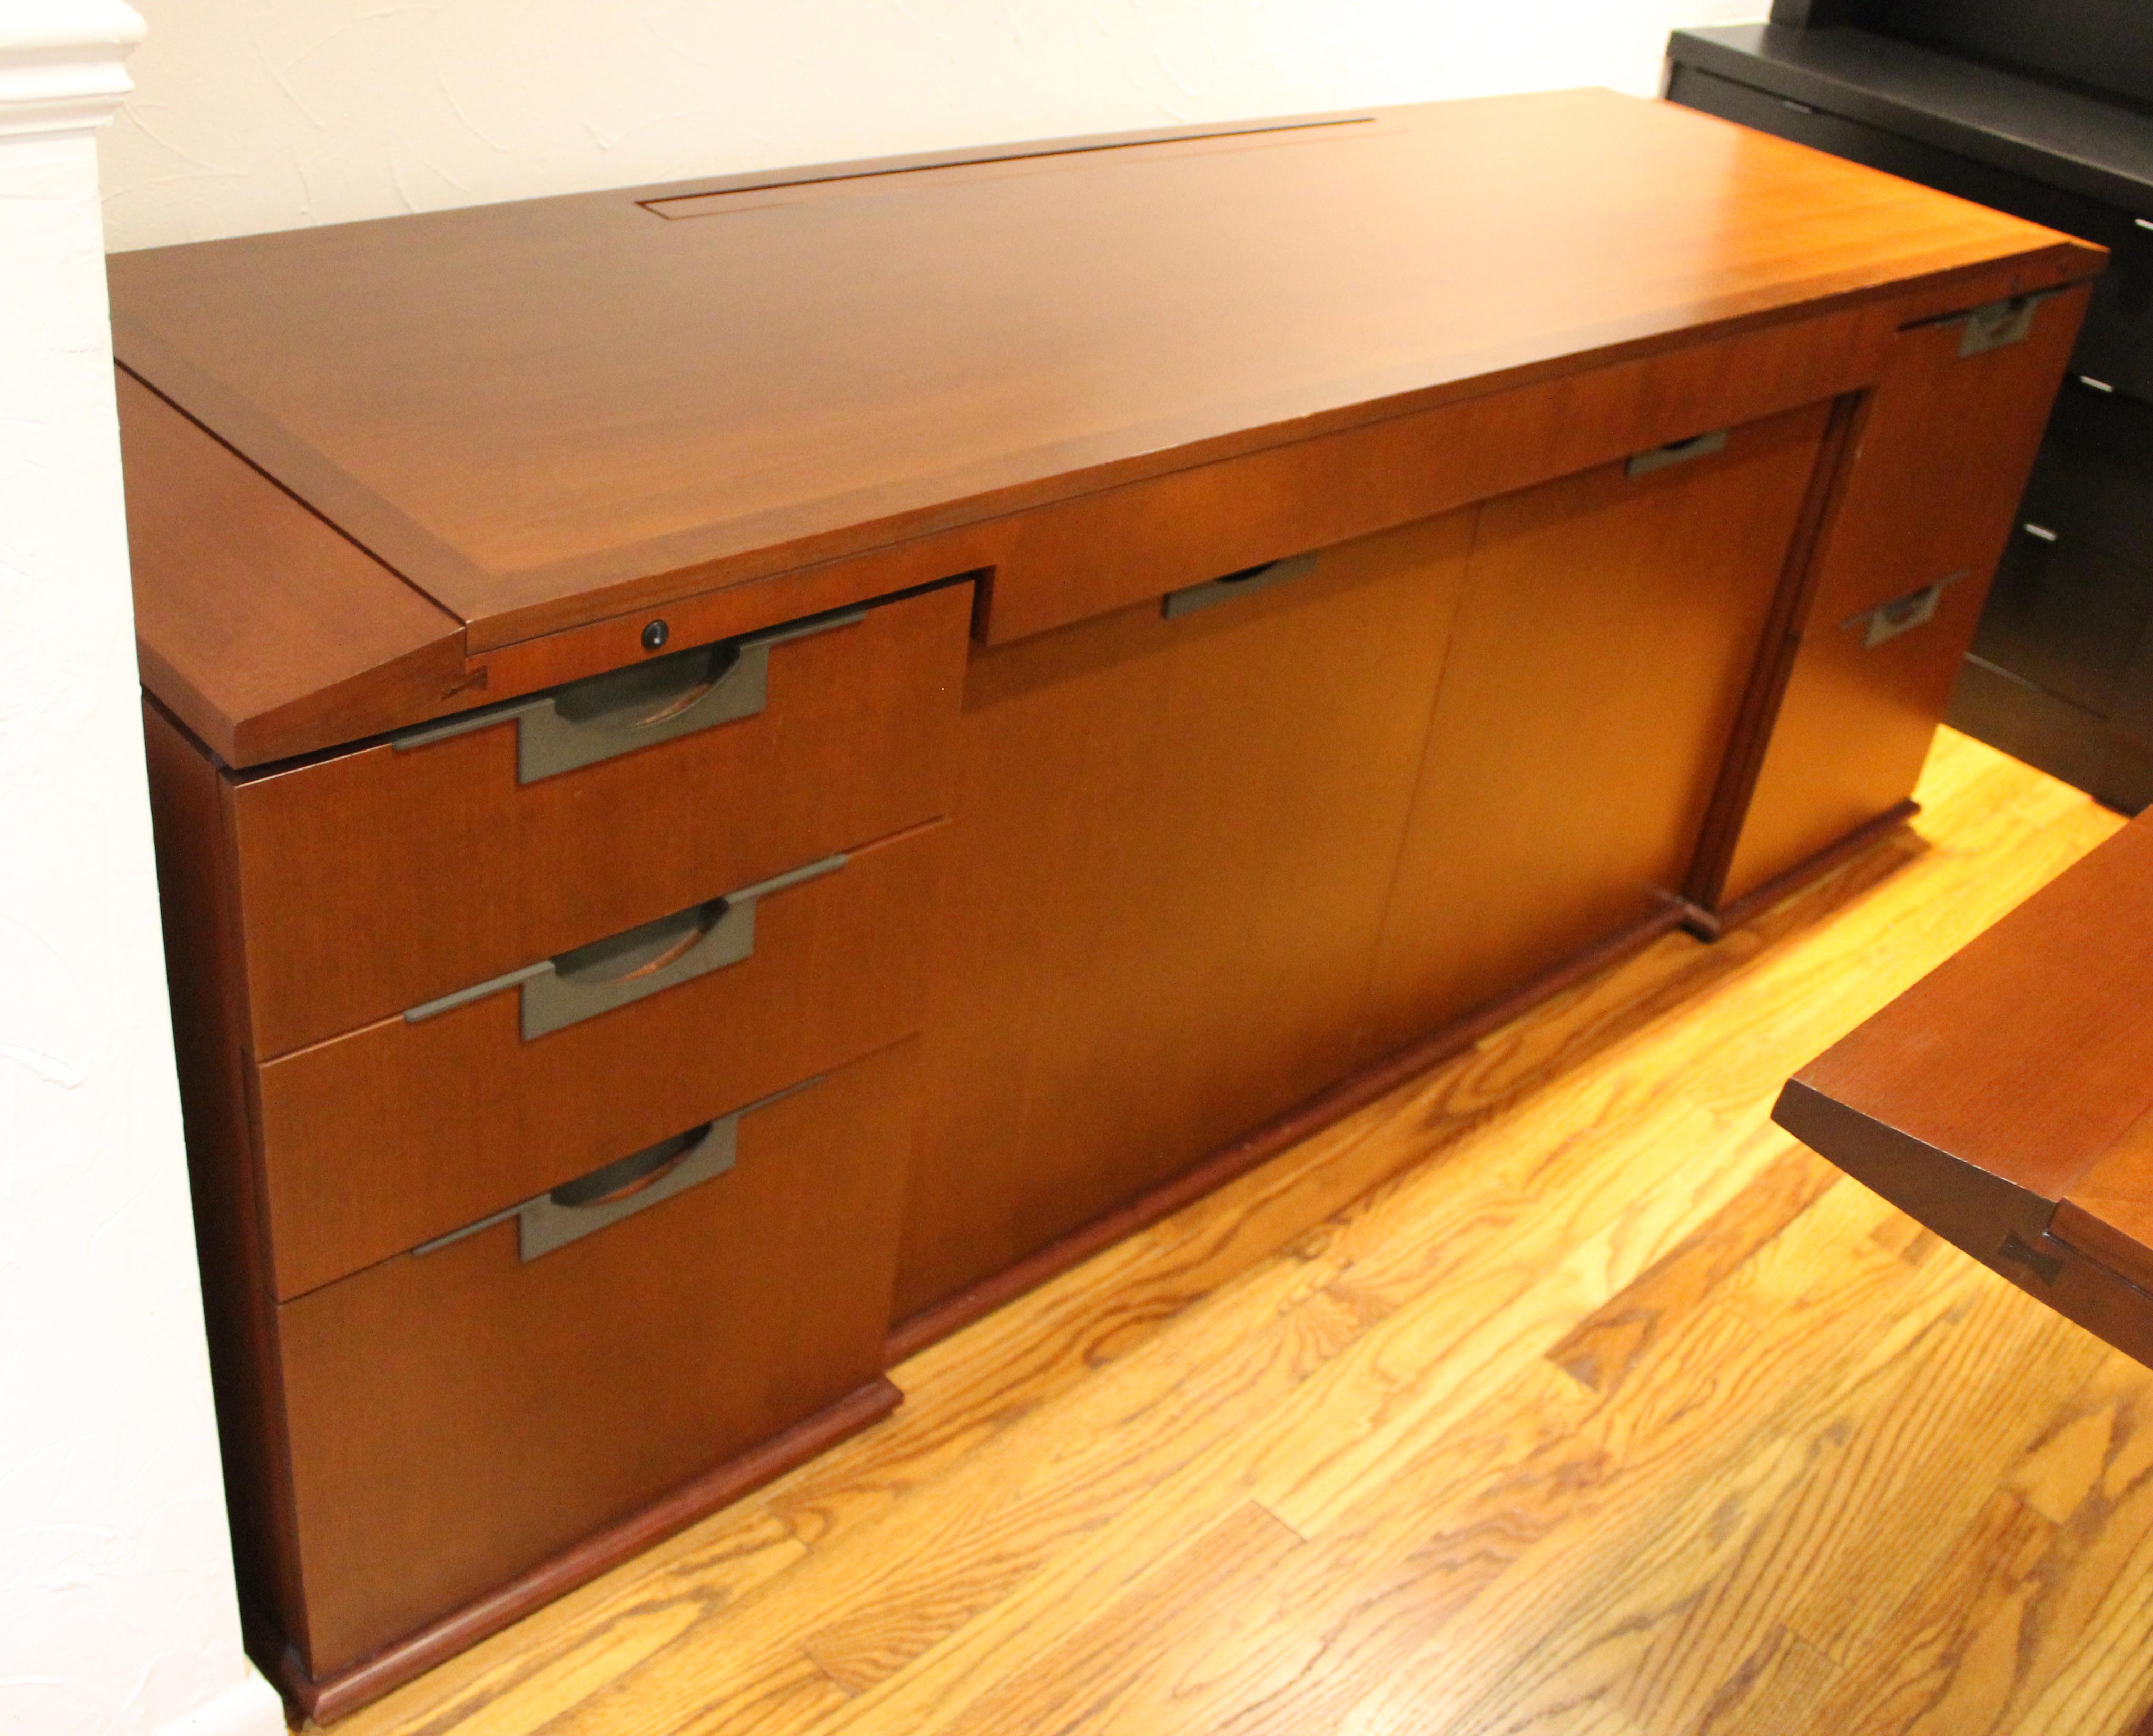 For your consideration is a phenomenal Arts & Crafts cabinet credenza sideboard, made of cherrywood, by Crofton International in the style of Frank Lloyd Wright. In excellent condition. The dimensions are 84